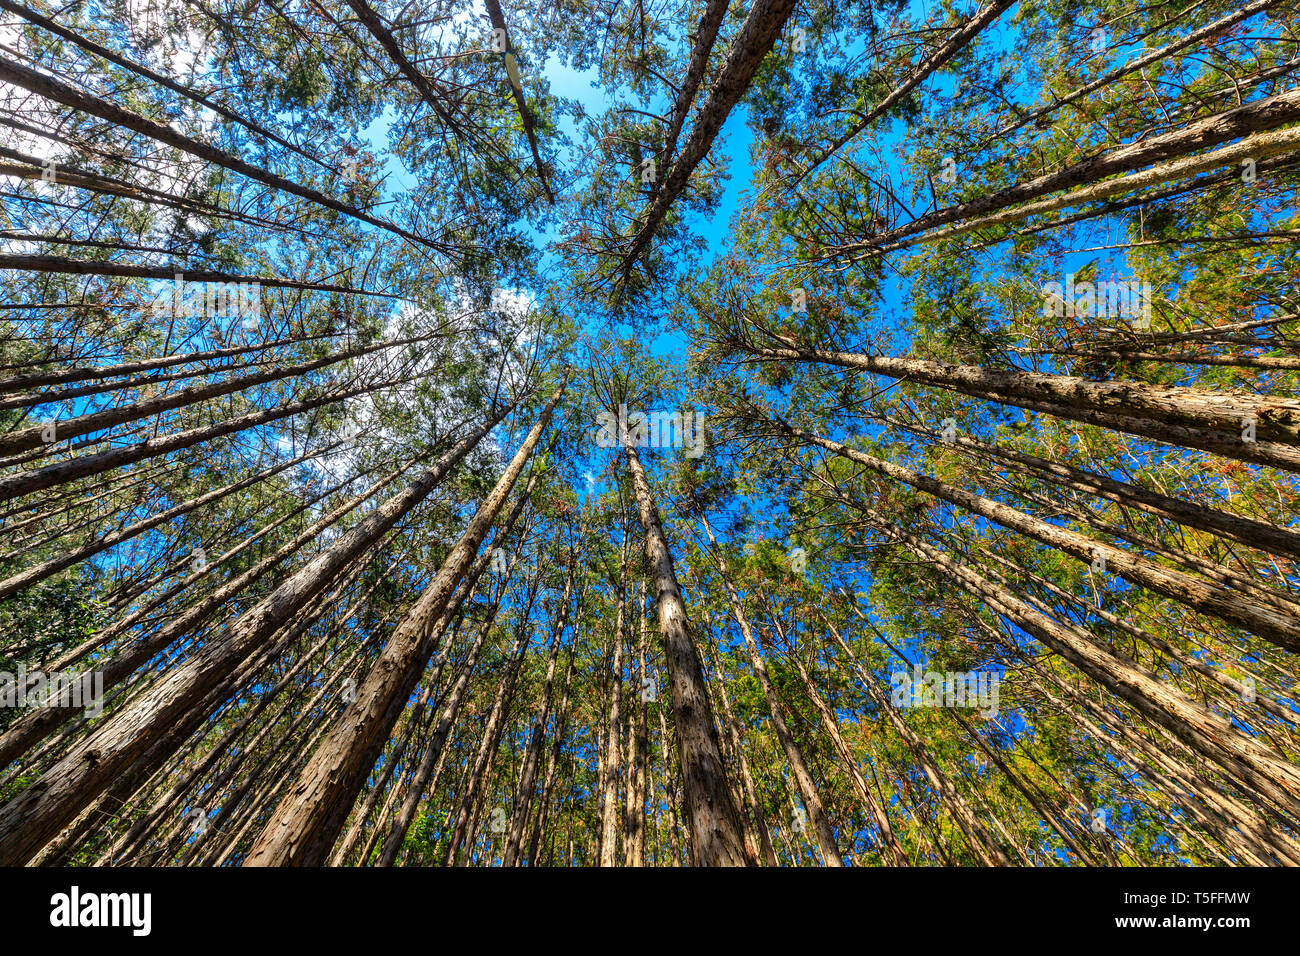 Japanese cypress forest Cryptomera Japonica dynamic view from below, Kumano Kodo forest in Japan Stock Photo